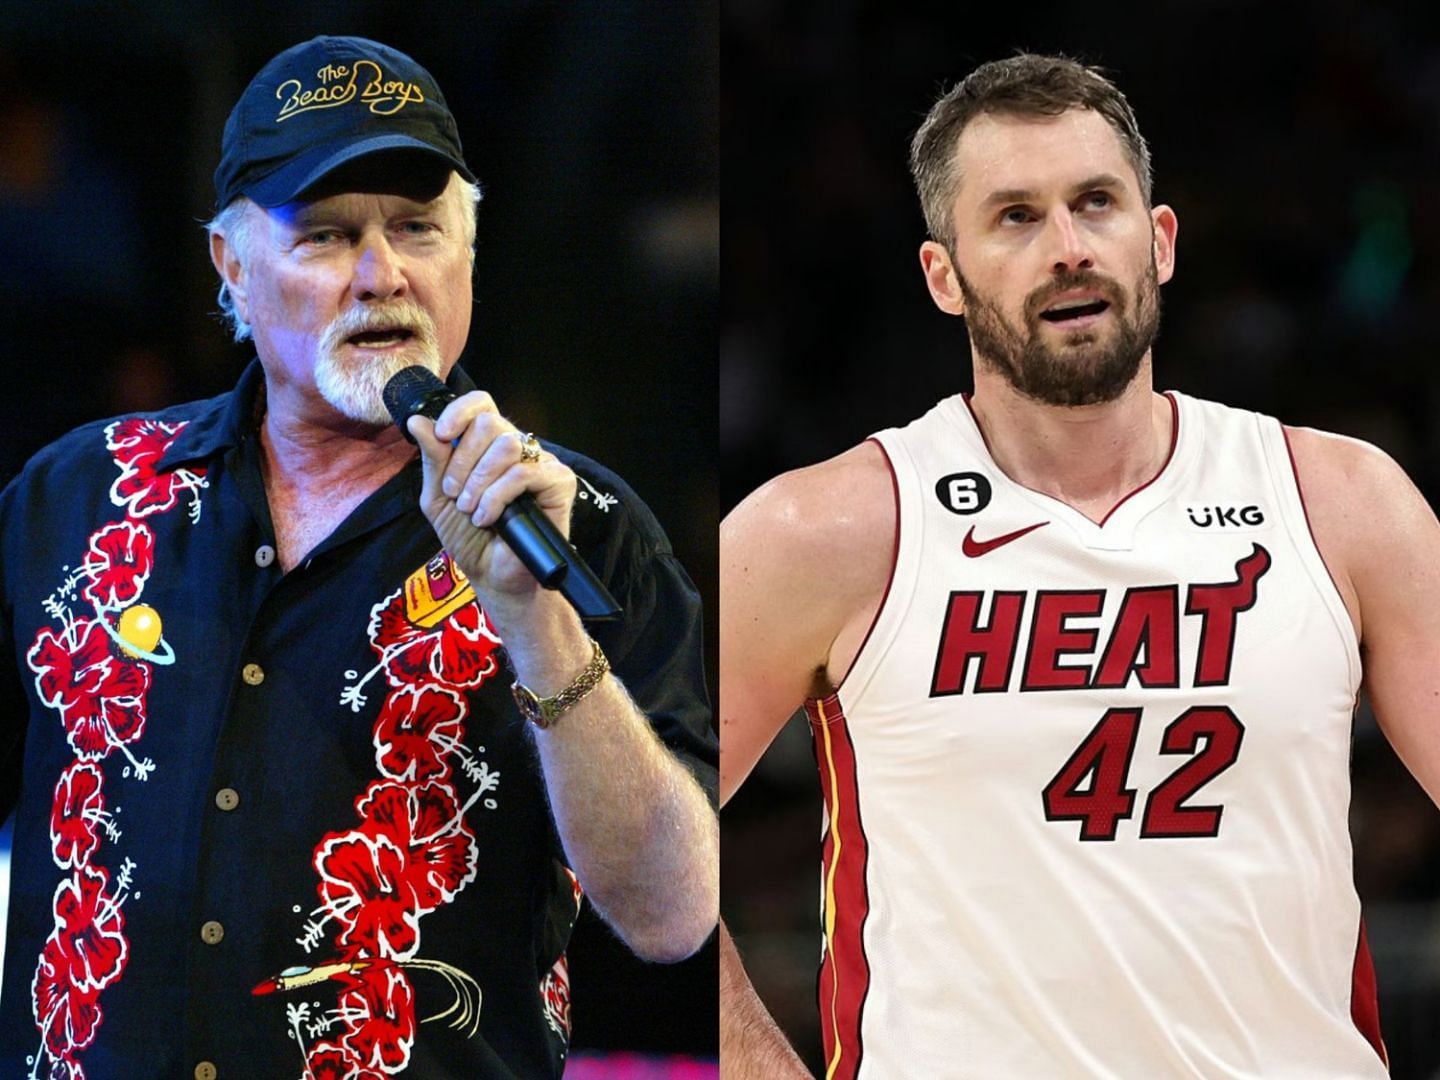 Mike Love of the Beach Boys and Kevin Love